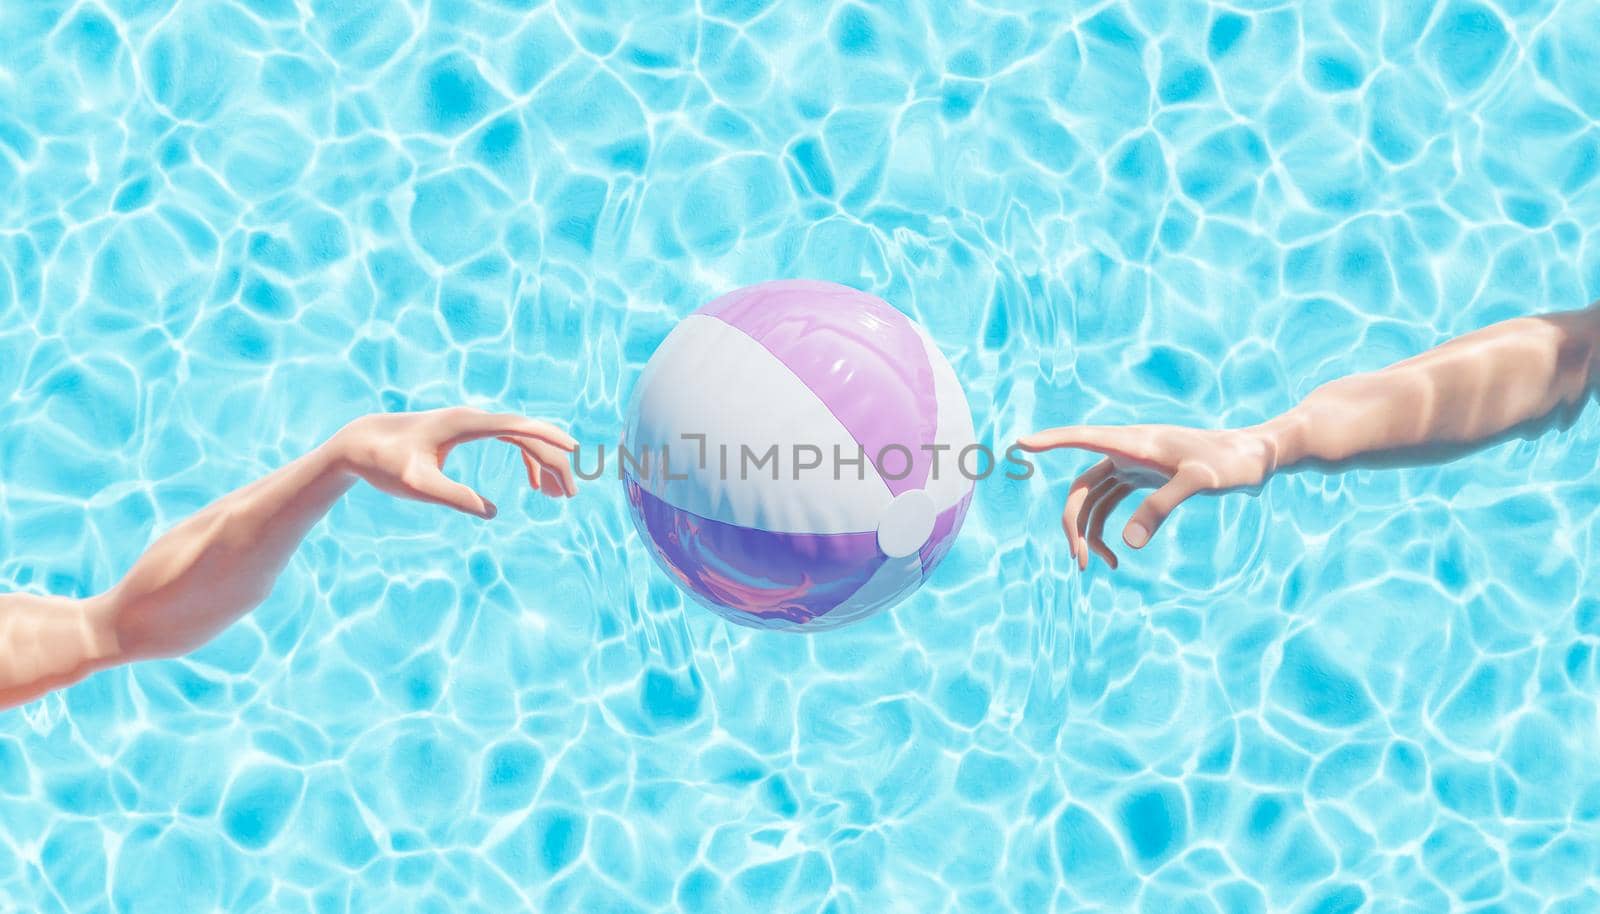 people trying to touch inflatable ball in pool by asolano